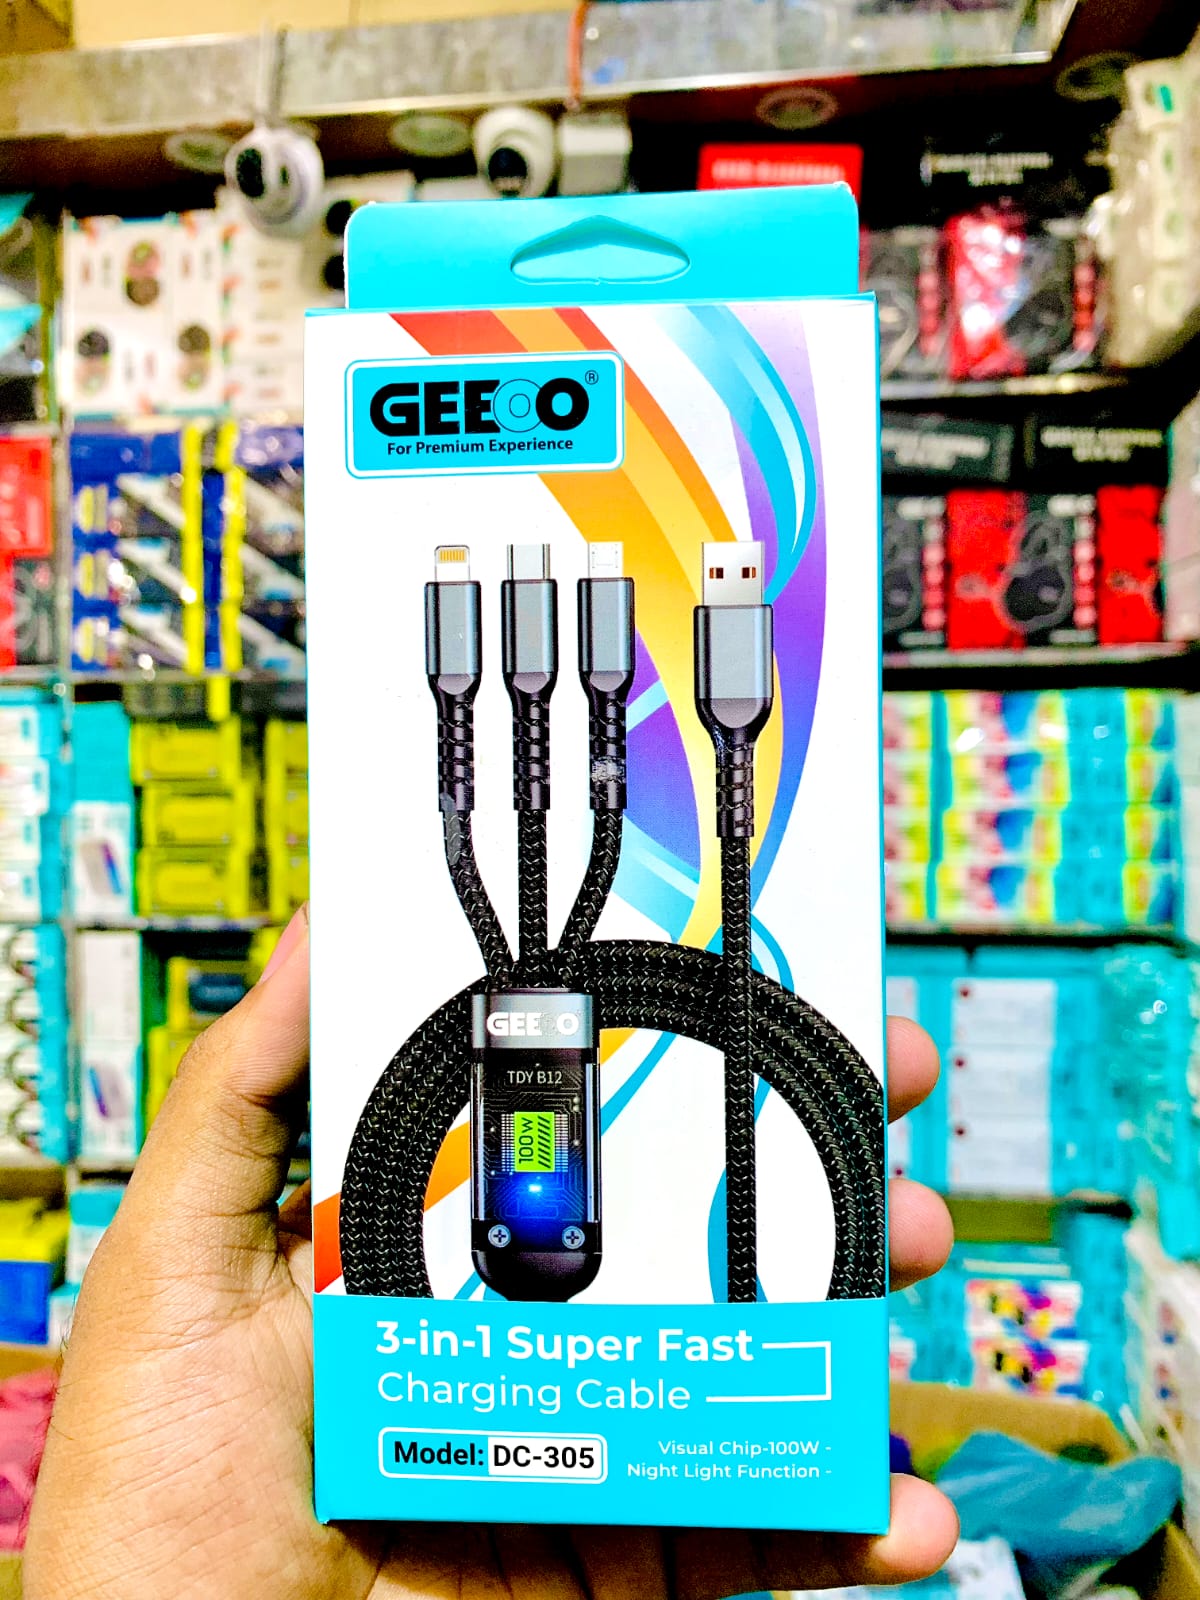 GEEOO MODEL DC305 3 In 1 Super Fast Charging Cable 1M Long 100W Safe Charge